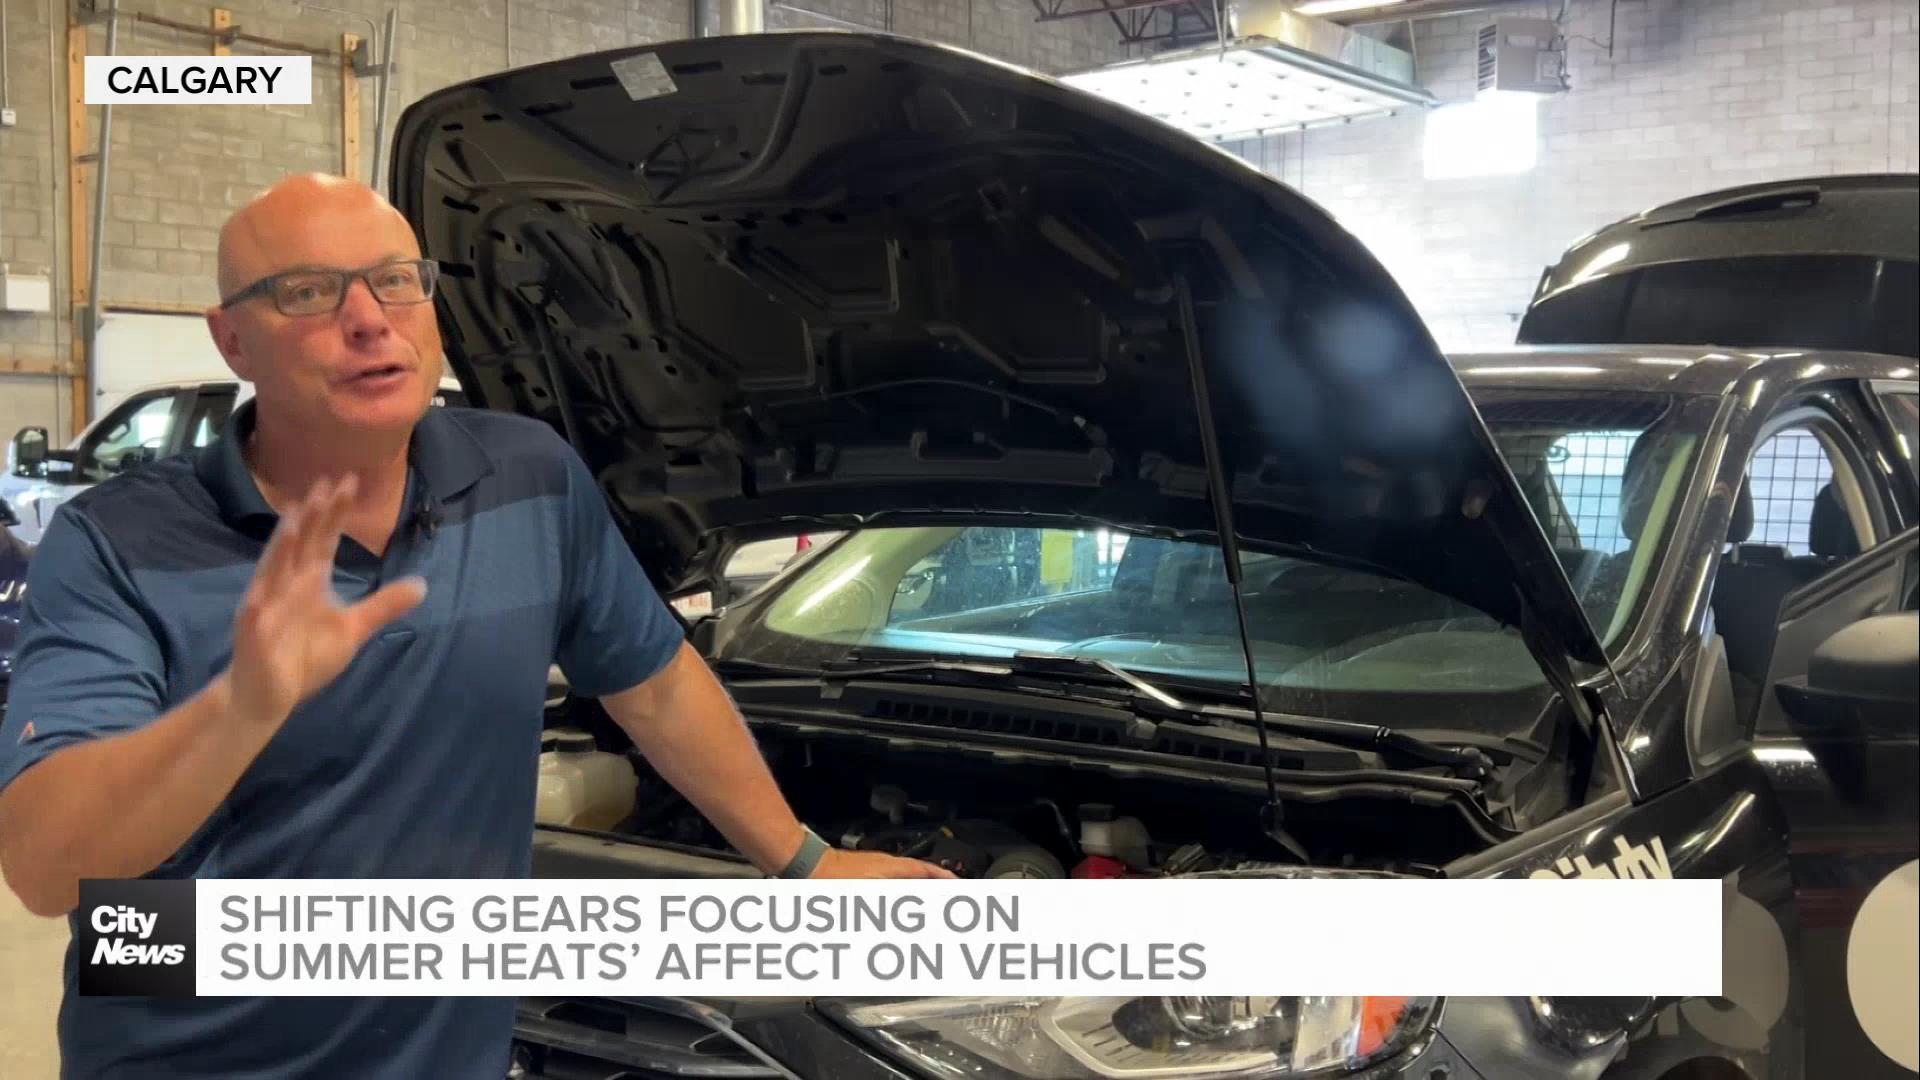 Focusing on summer heat’s affect on cars